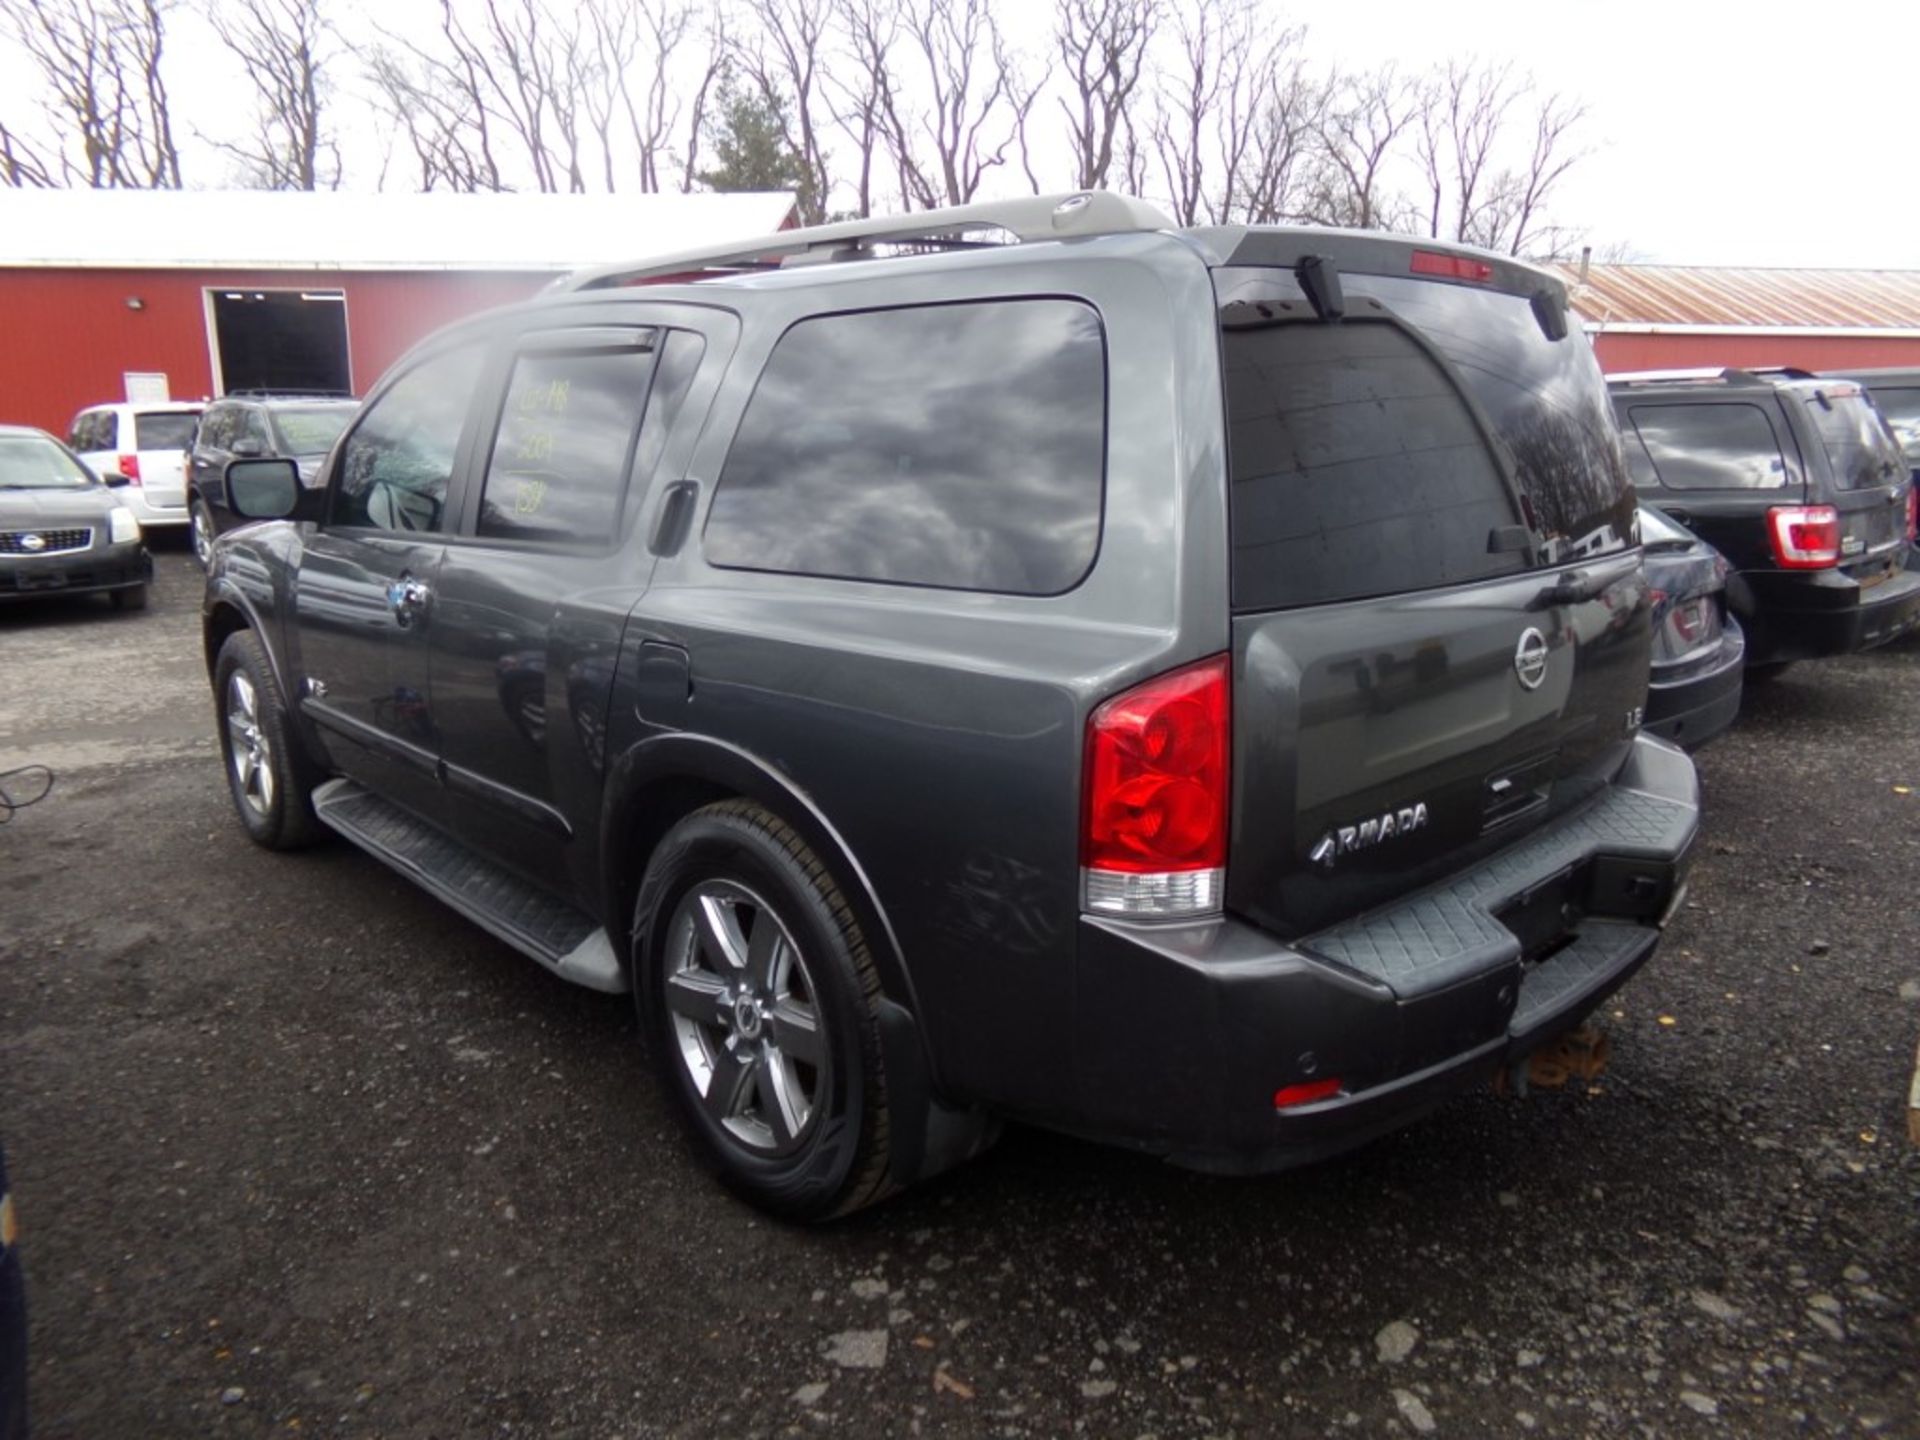 2009 Nissan Armada LE 4X4, Leather, Sunroof, 3rd Row Seating, Grey, 158,581 Miles, VIN# - Image 2 of 13